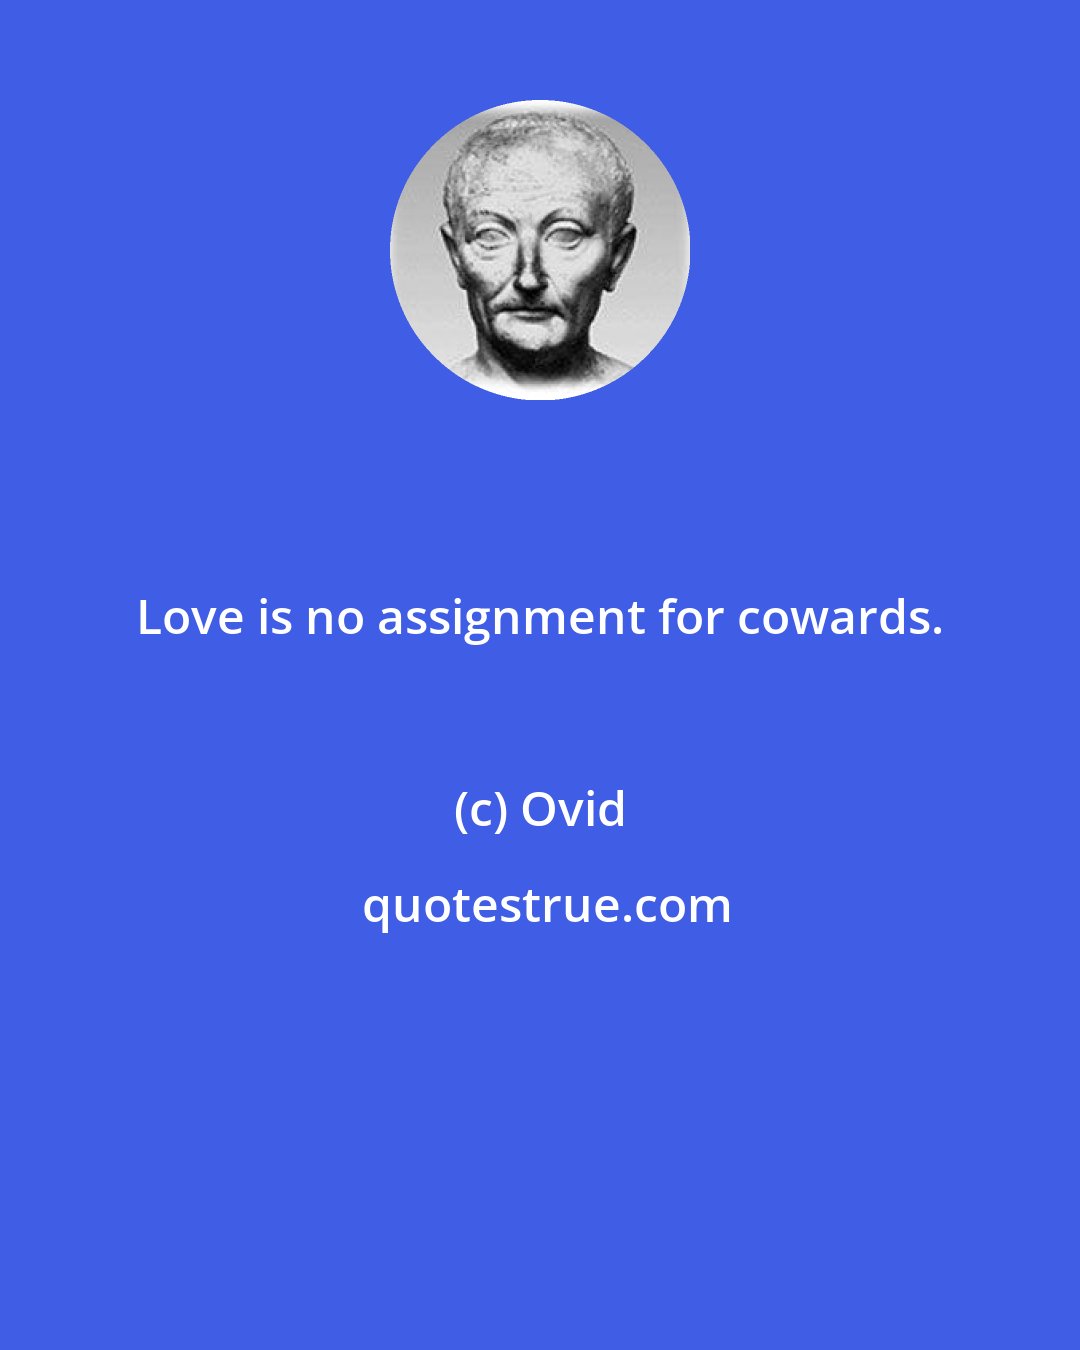 Ovid: Love is no assignment for cowards.